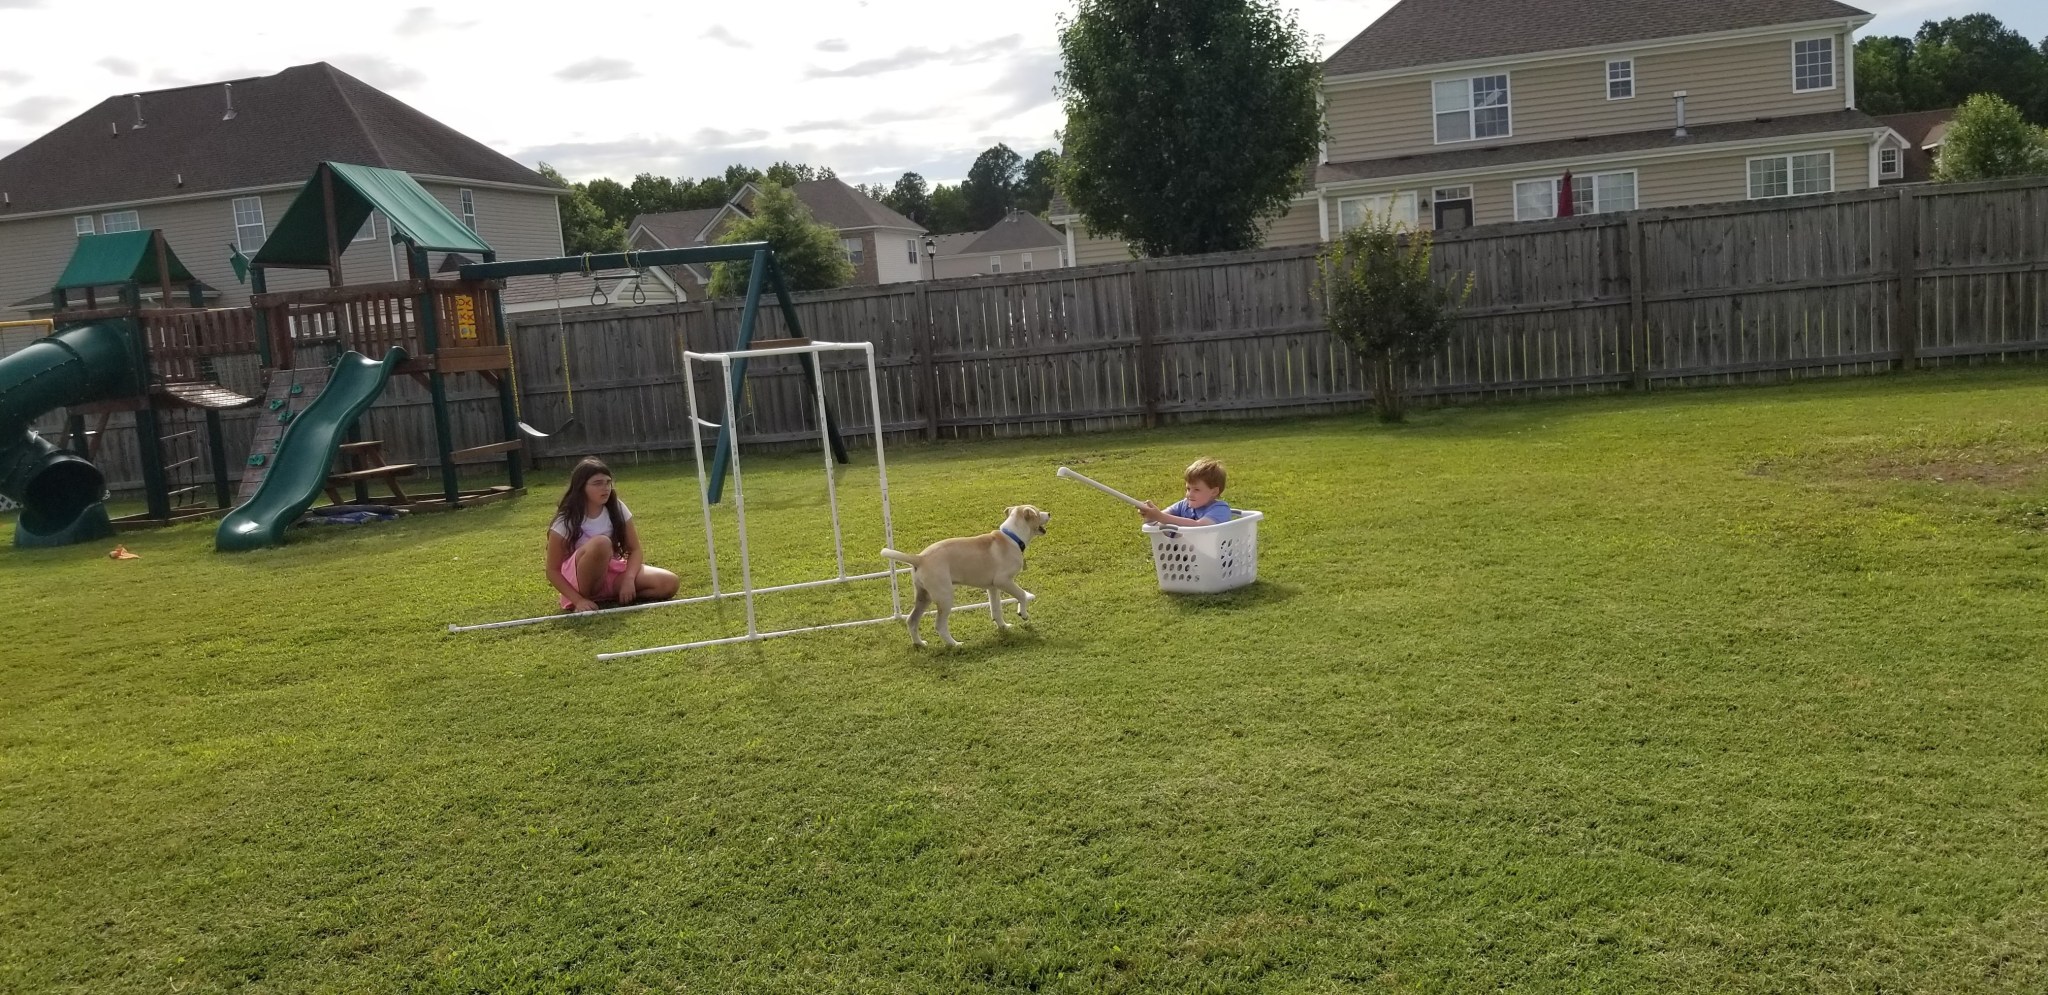 Both of Smith’s children, ages ten and five, play in the backyard with their dog, Kuiper, when not doing distance learning.